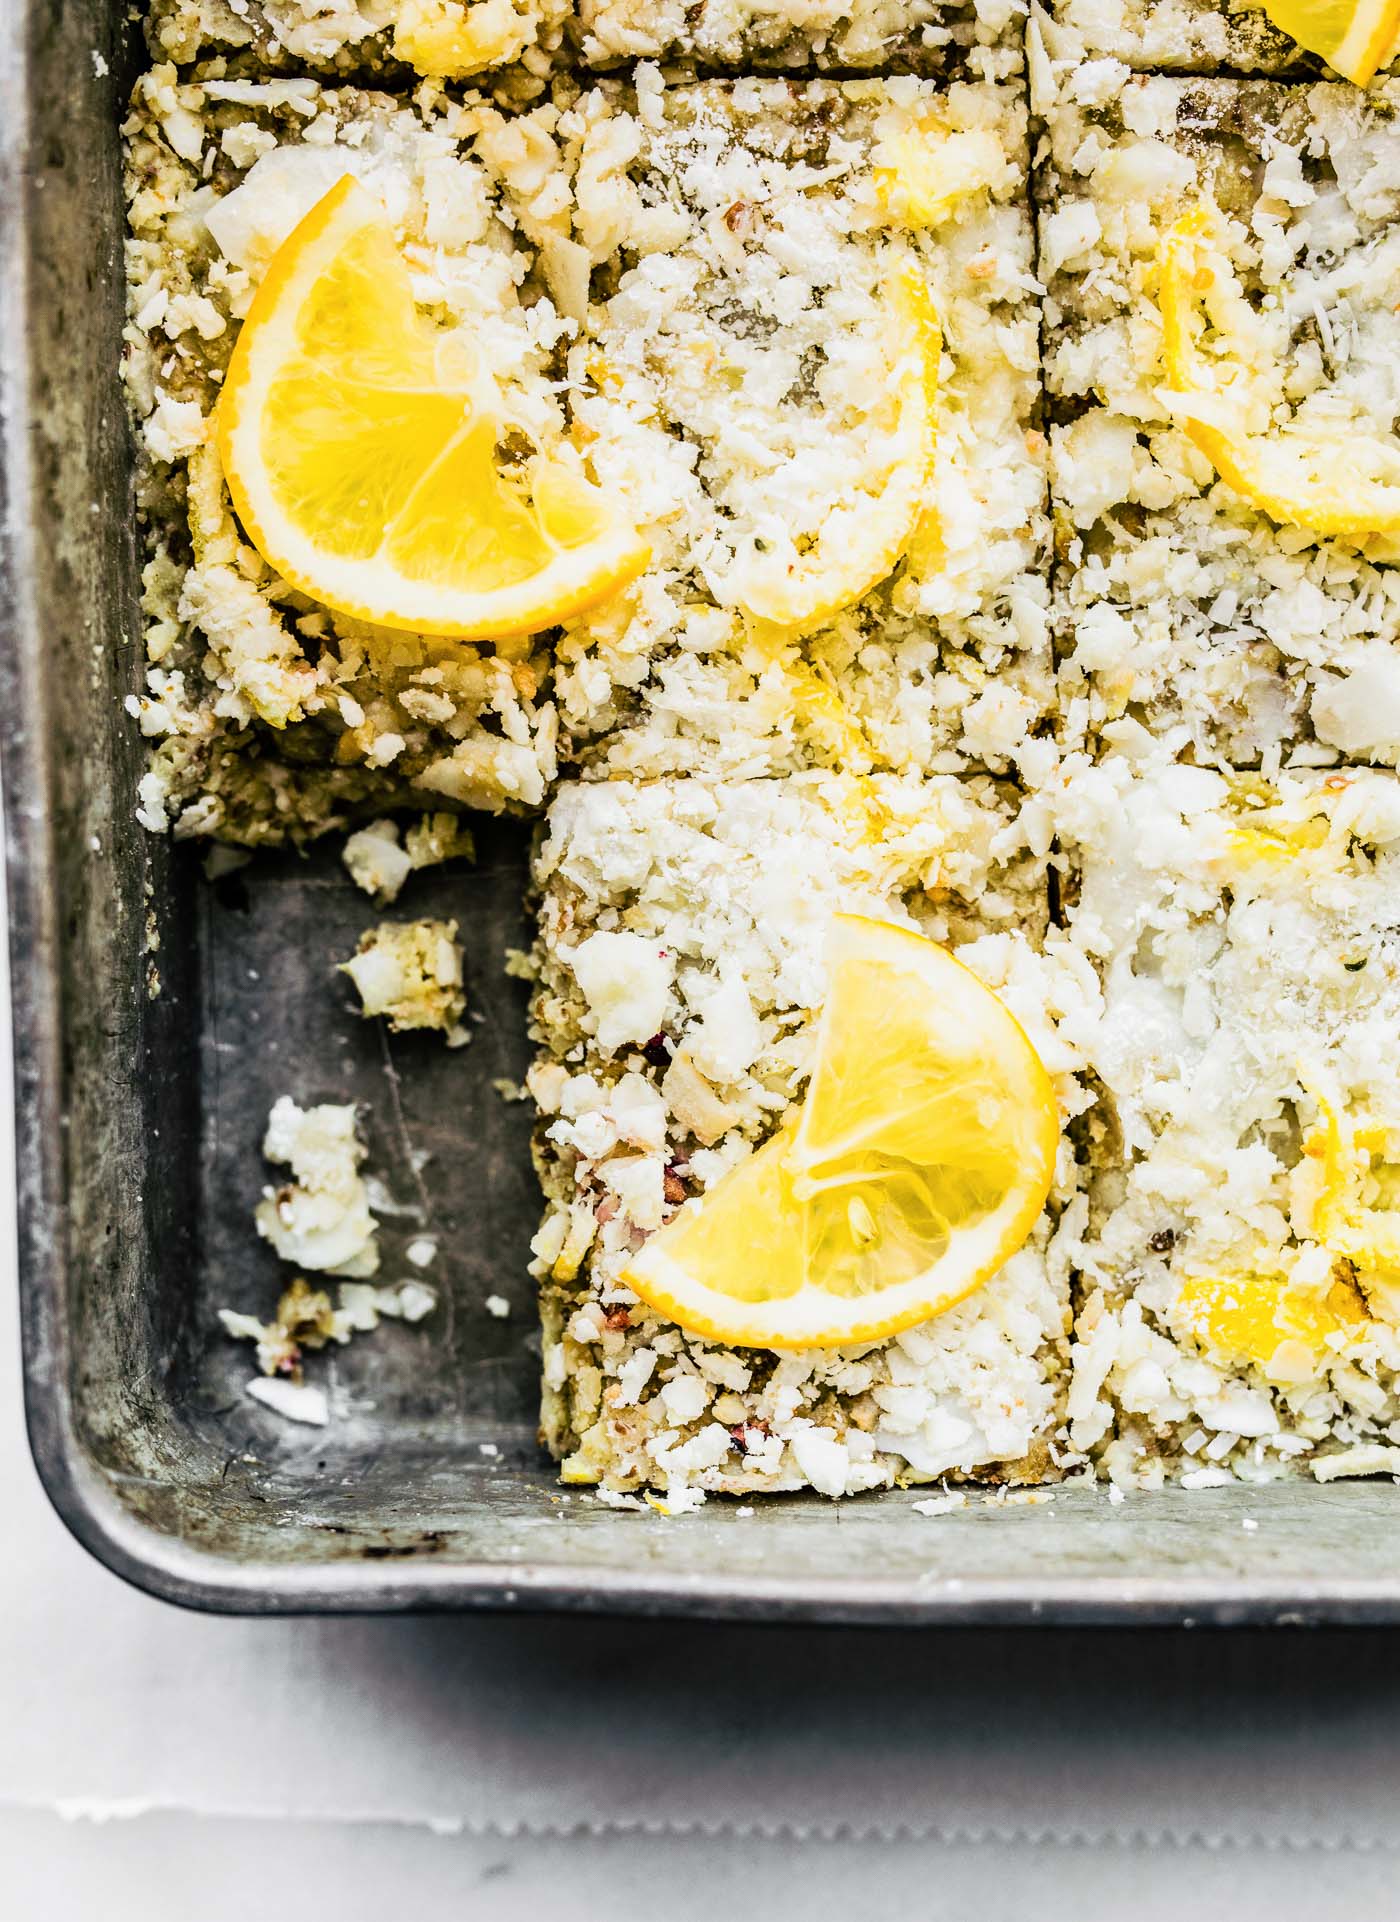 EASY LEMON COCONUT PALEO ENERGY BARS that are lower in sugar and NO BAKING required. These zesty energy bars are made with just a few simple ingredients; ground nuts, lemon zest, unsweetened coconut, and just a tiny bit of unrefined natural sugar. Perfect for the carb conscious snacker. Vegan and keto friendly.